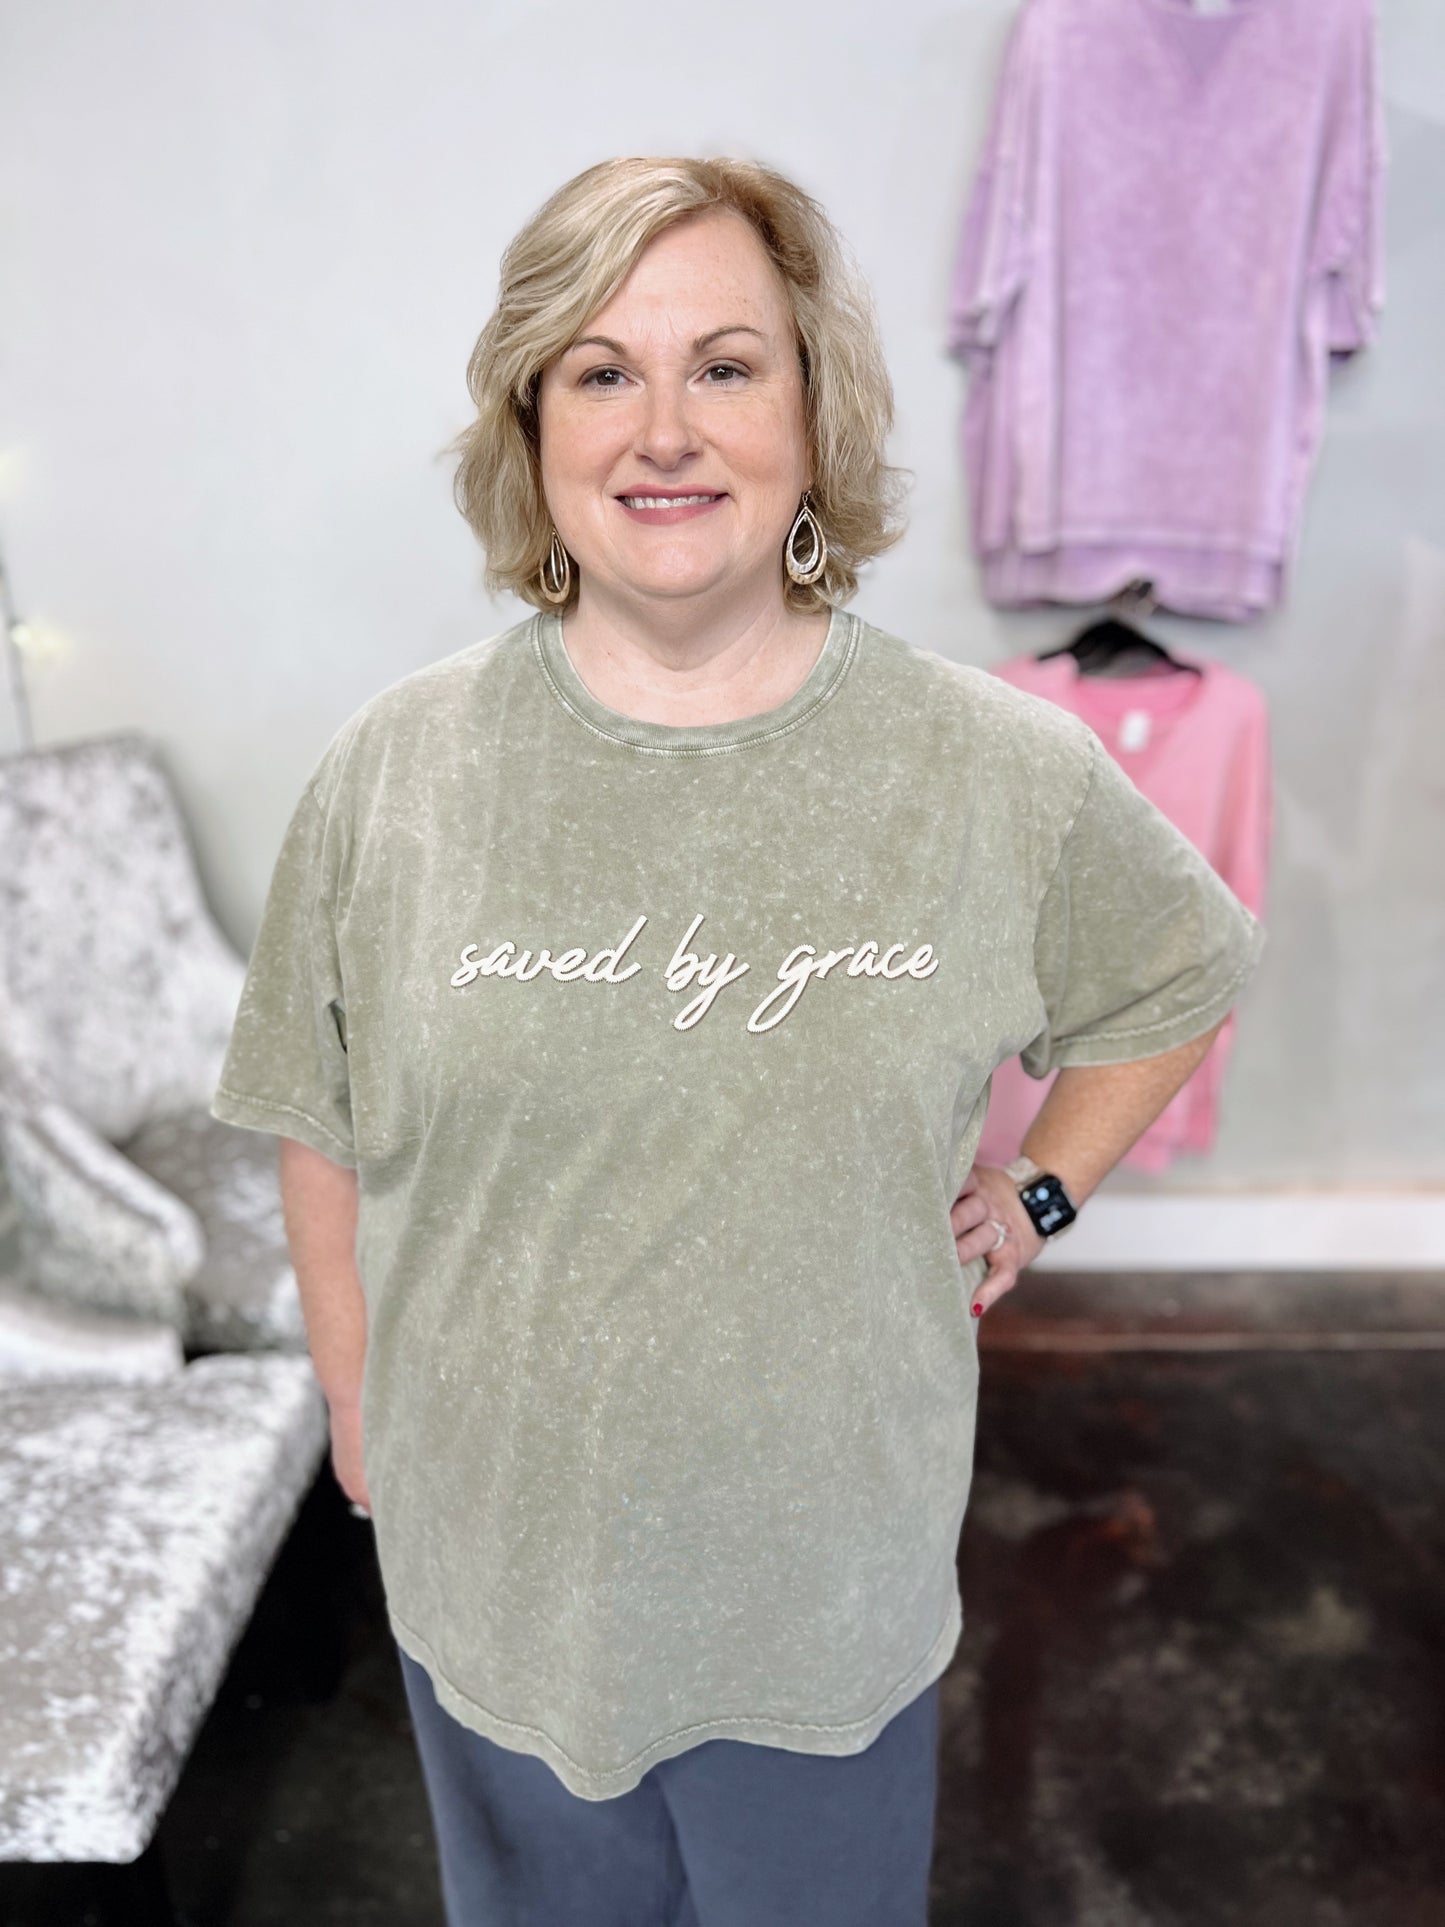 Plus Saved By Grace Tee